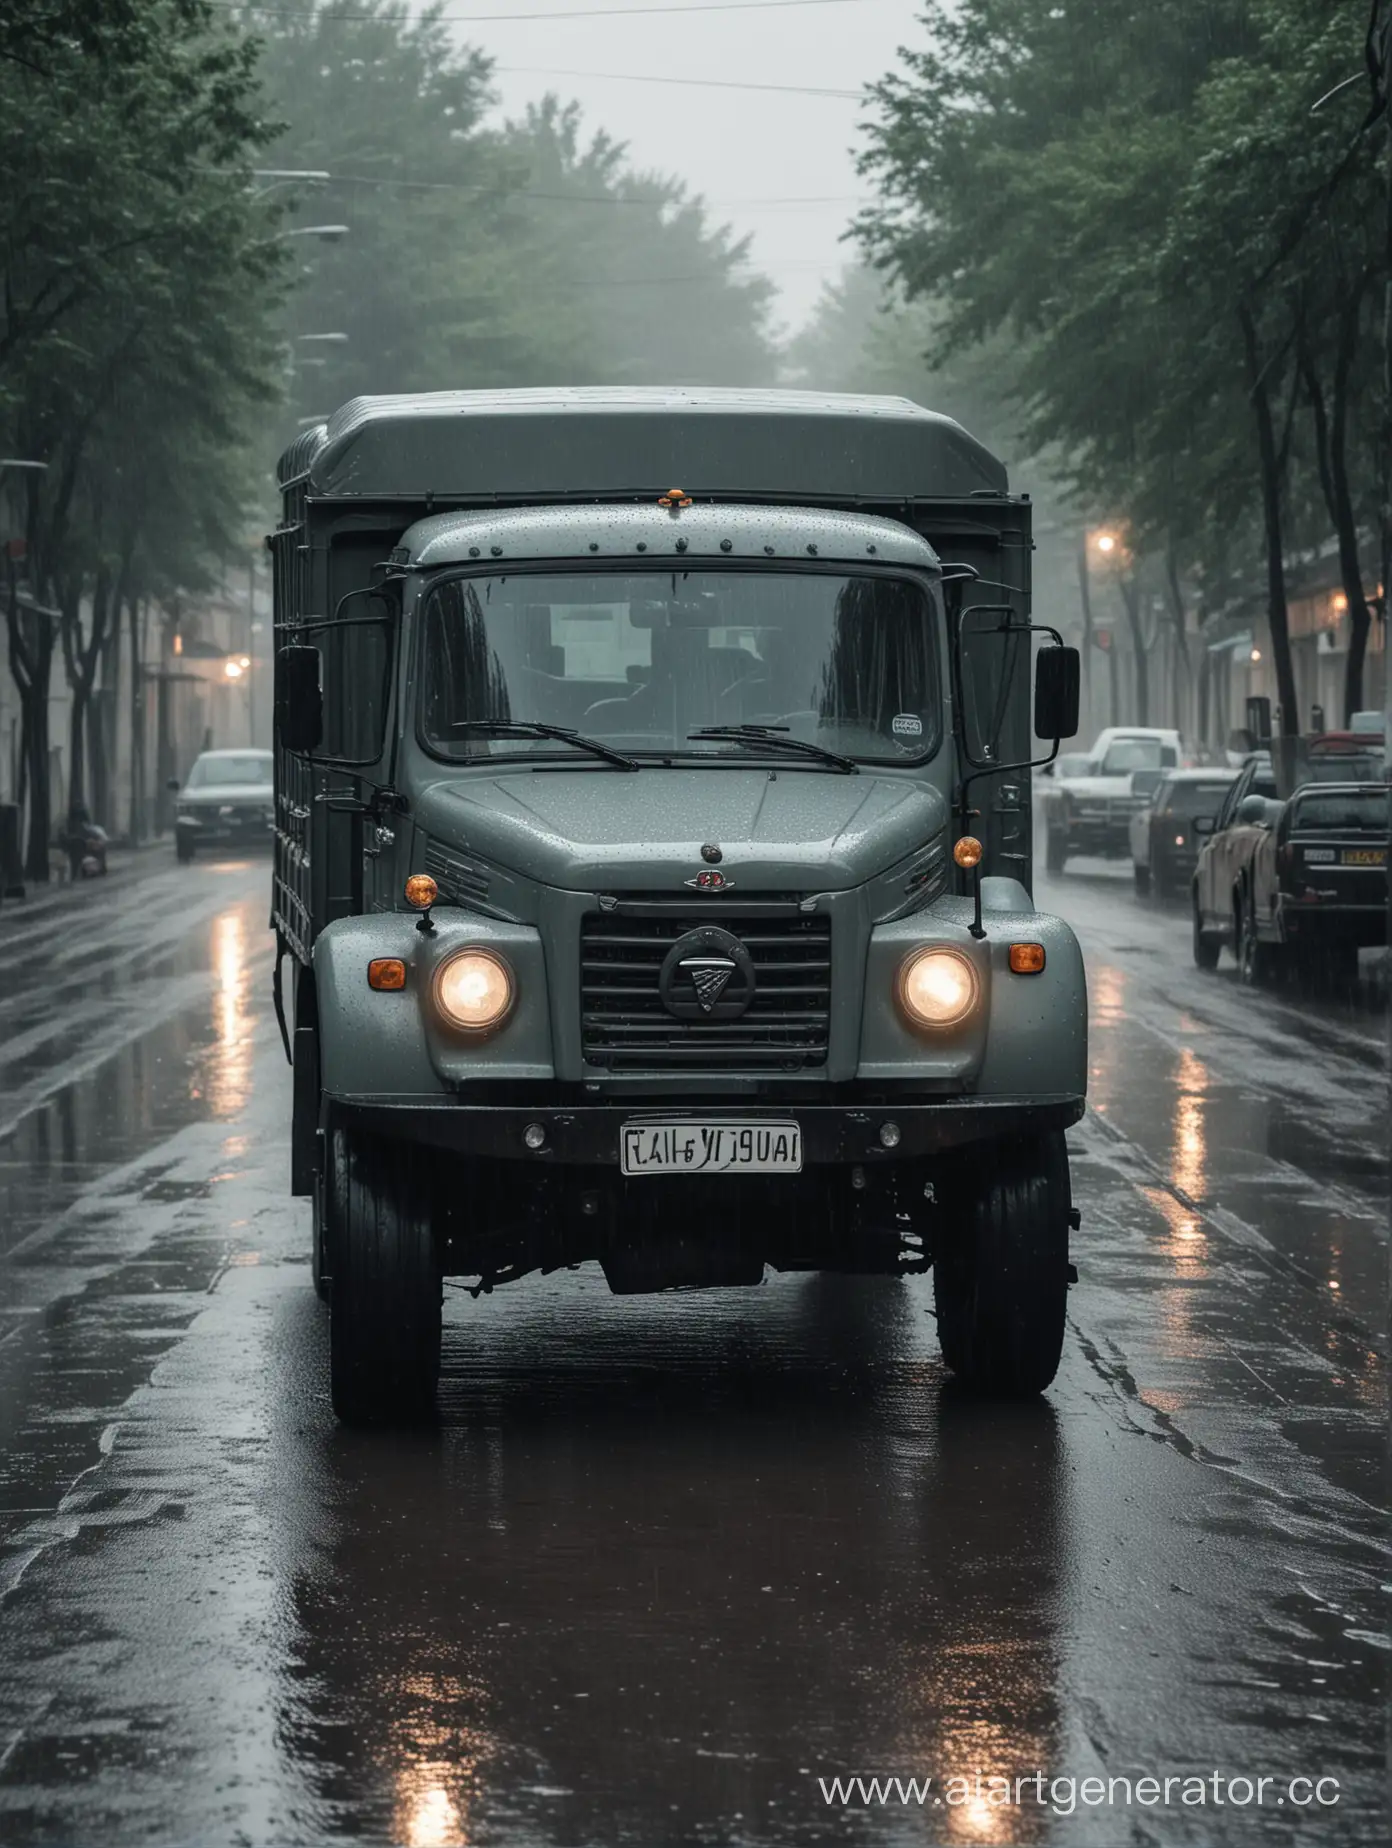 Rainy-Day-Scene-Gray-Atmosphere-with-ZIL-Car